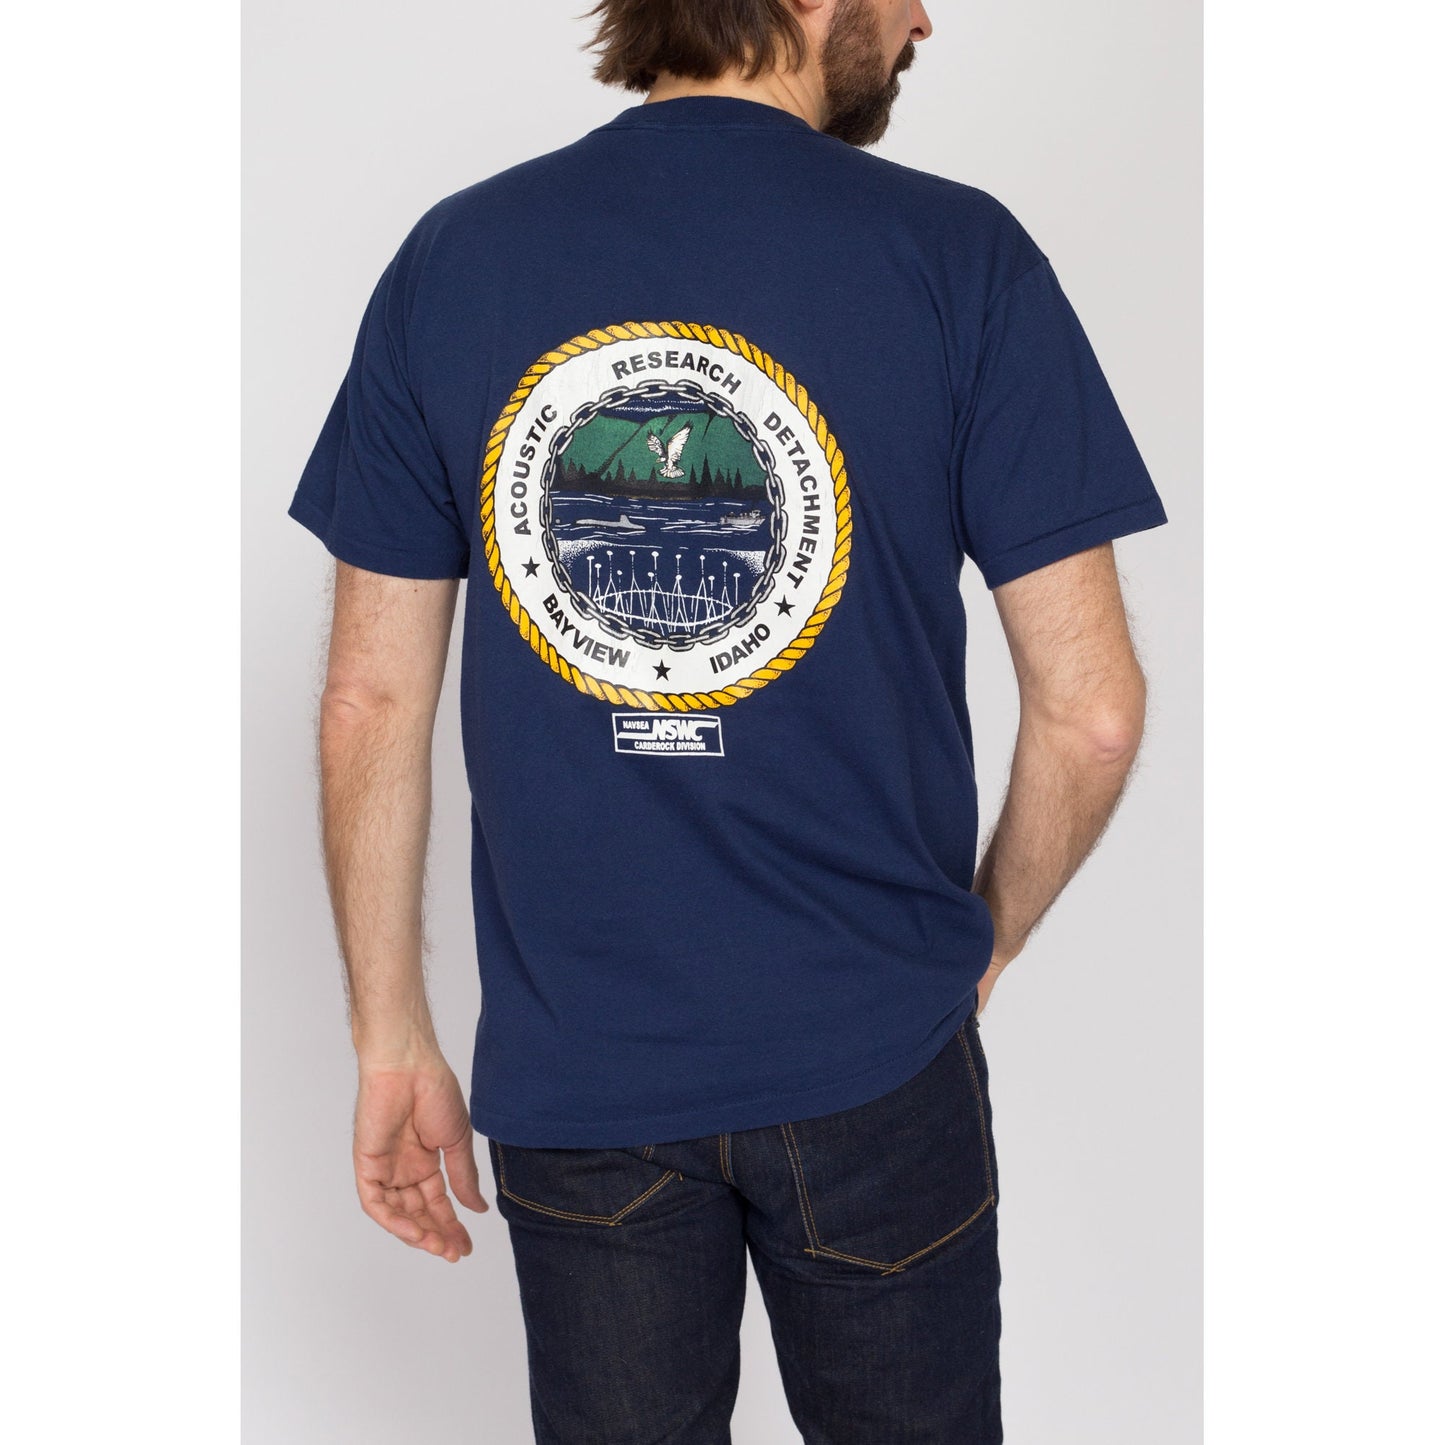 90s Acoustic Research Detachment Submarine T Shirt | Vintage Bayview Idaho Blue US Navy Graphic Tee